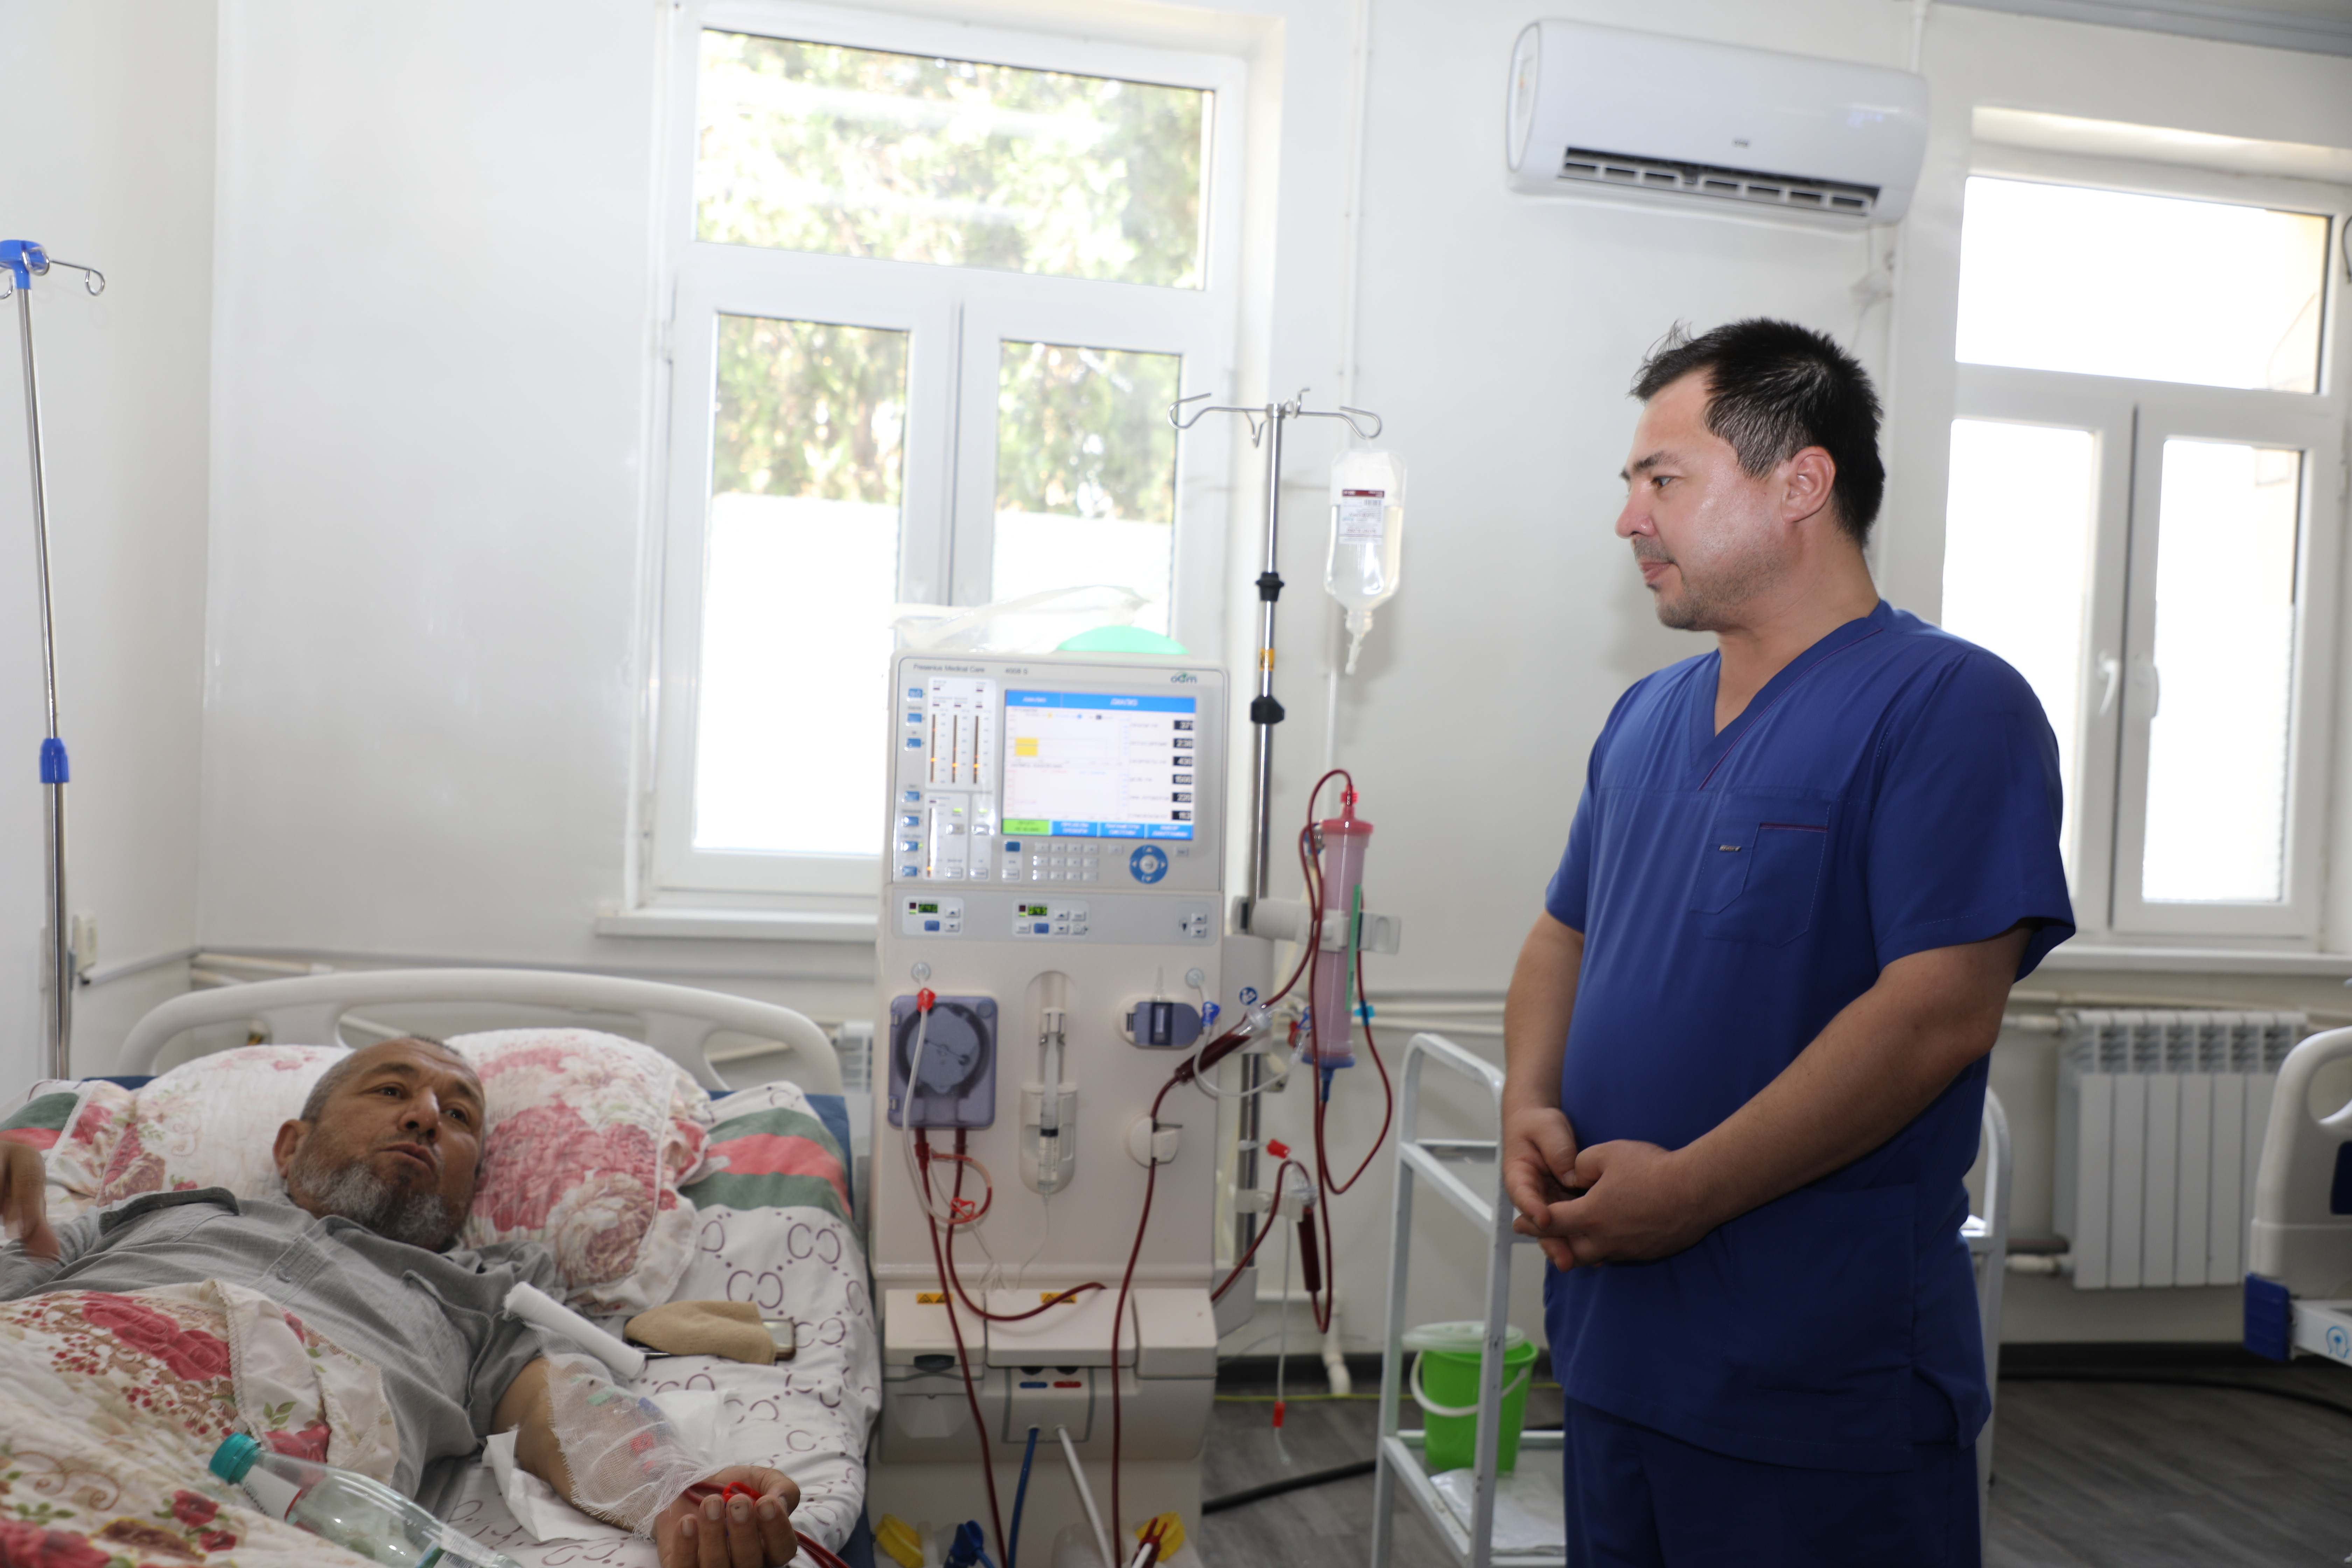 A doctor and the hemodialysis patient